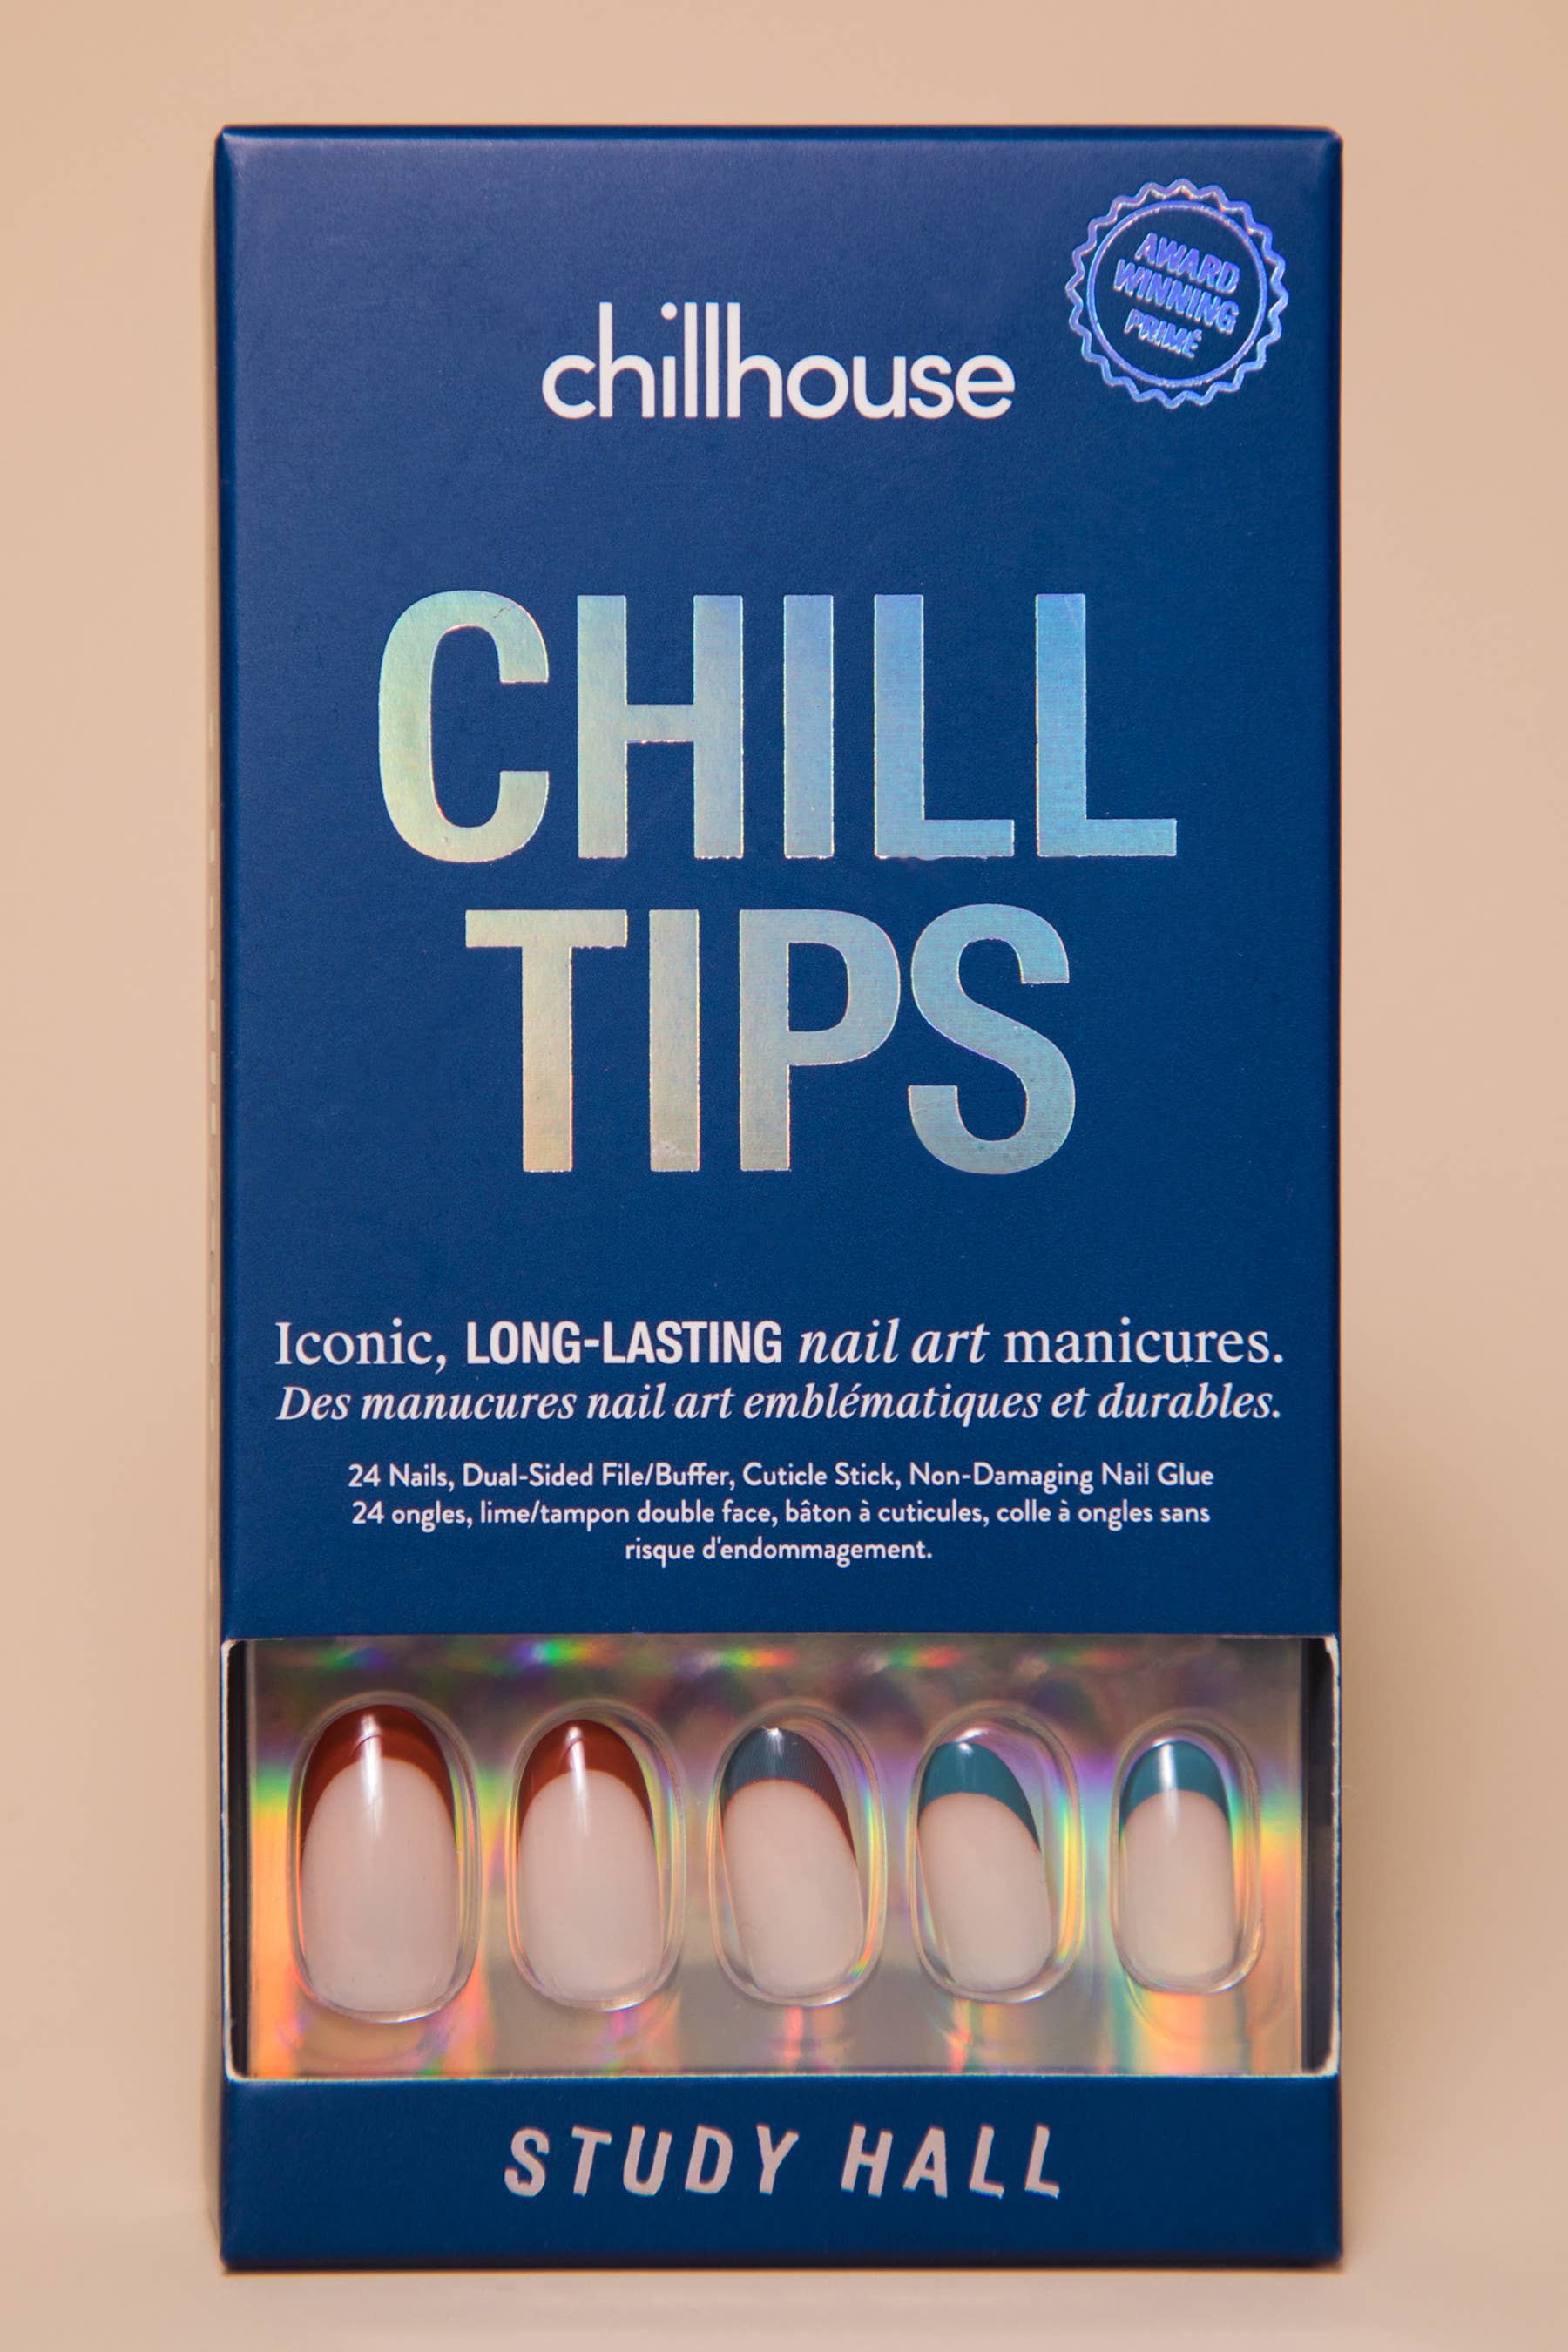 Chill Tips - Study Hall by Chillhouse